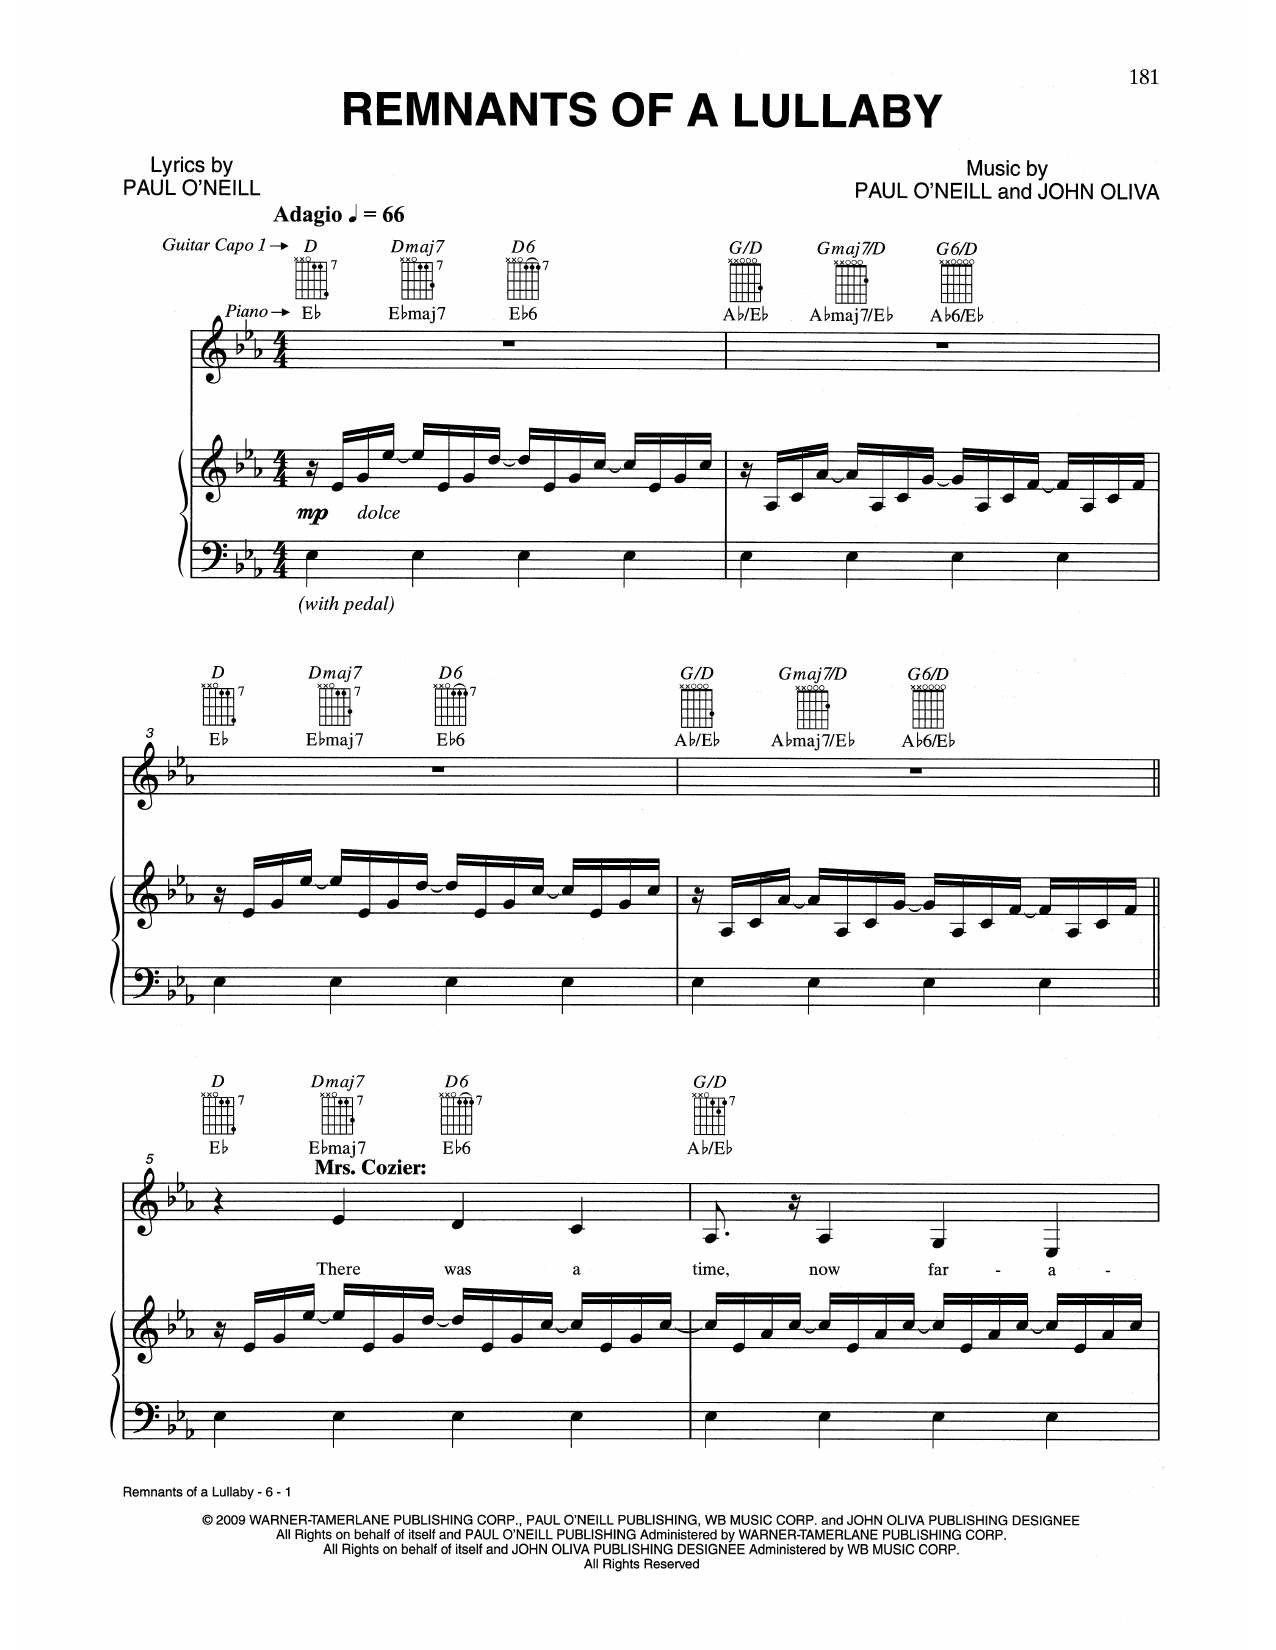 Download Trans-Siberian Orchestra Remnants Of A Lullaby Sheet Music